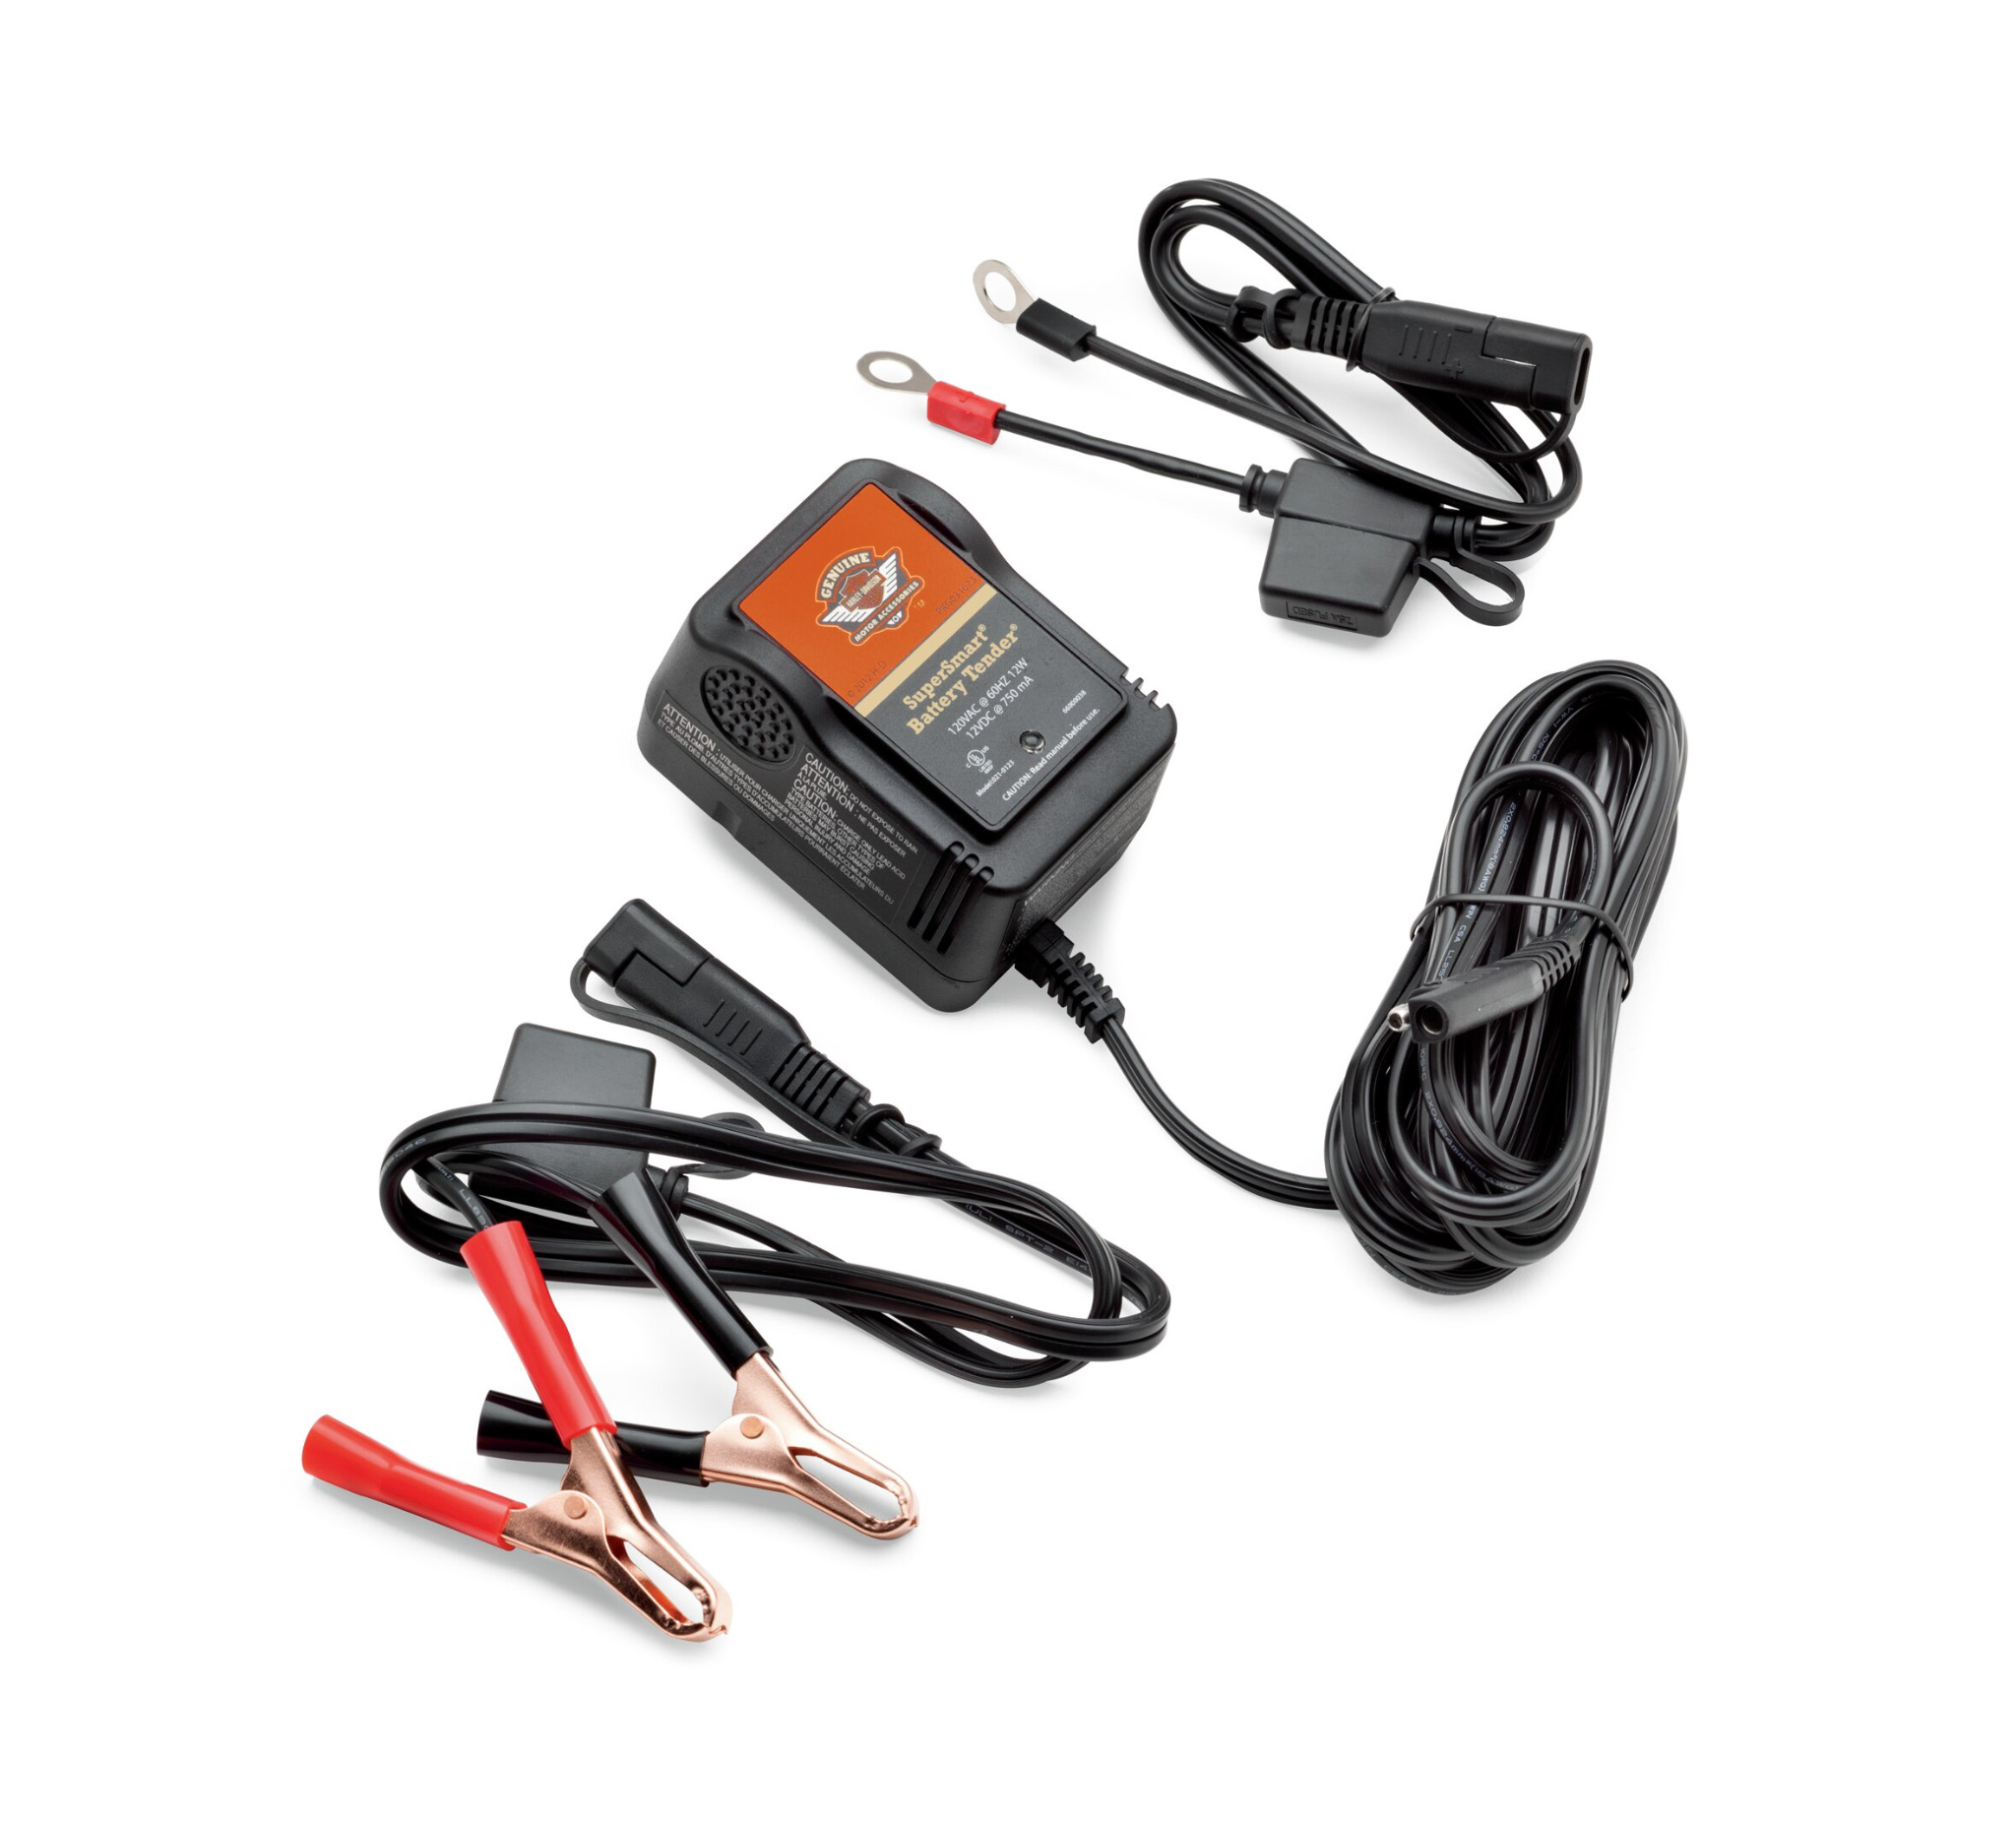 750ma Supersmart Battery Charger 66000038 Harley Davidson Luxembourg